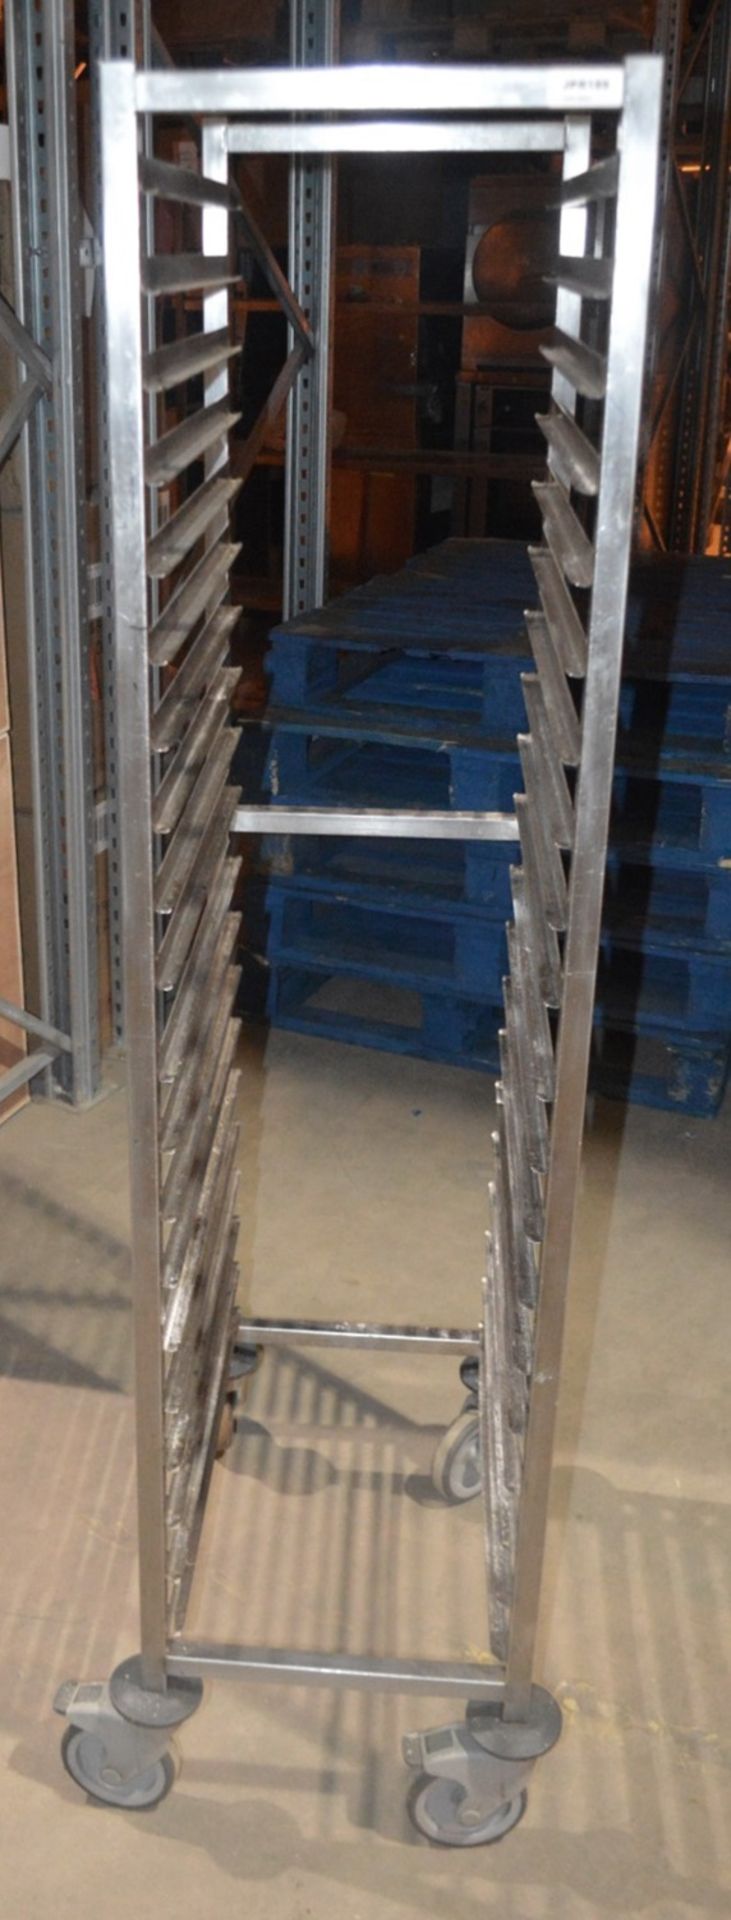 1 x Stainless Steel Commercial Kitchen Rack On Castors - Dimensions: H165 x W40 x D48cm - Very - Image 3 of 4